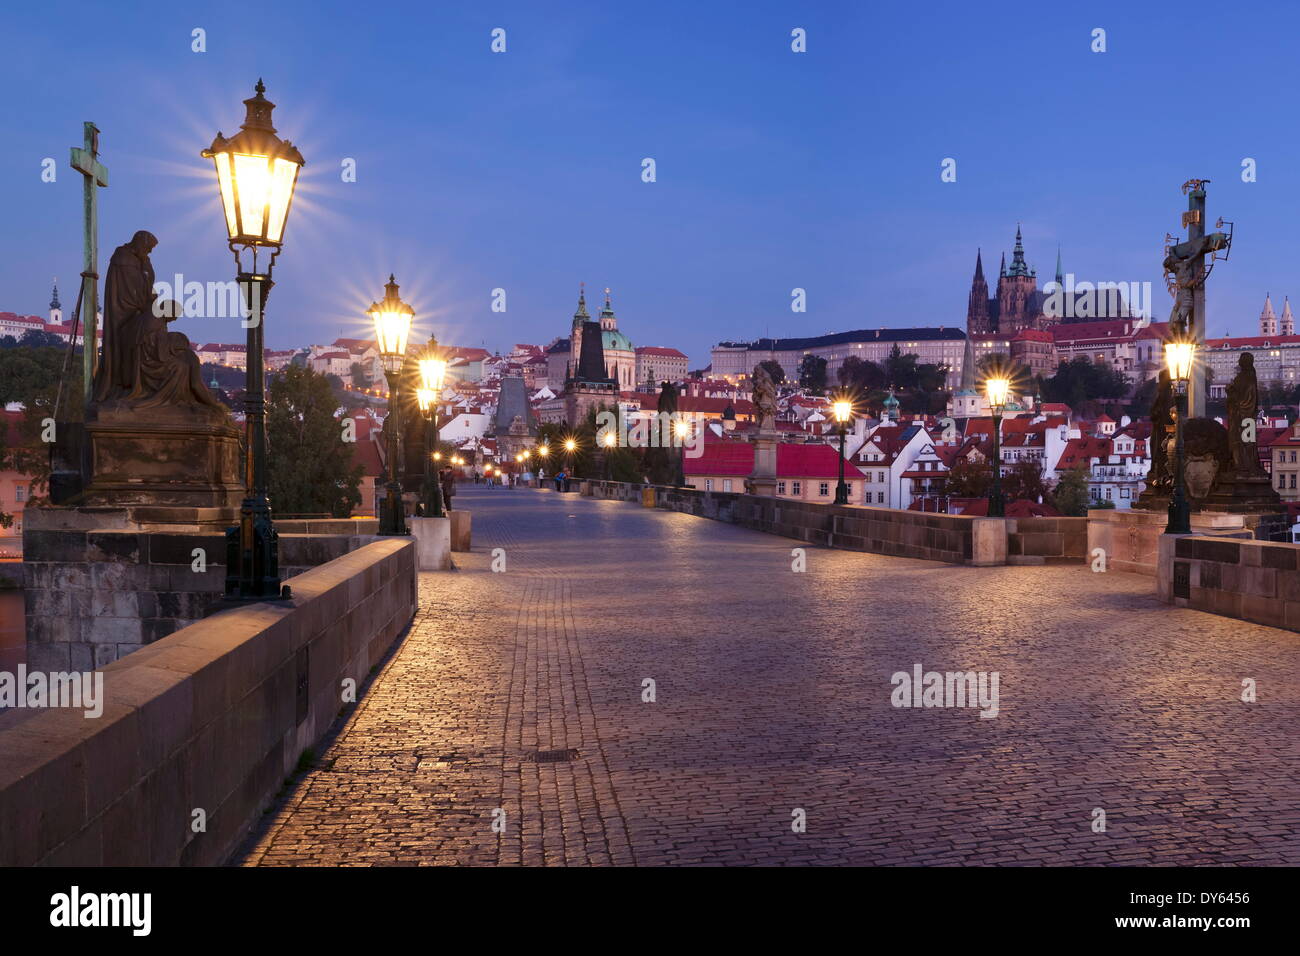 Illuminated Charles Bridge and Castle District with St. Vitus Cathedral and Royal Palace, UNESCO Site, Prague, Czech Republic Stock Photo